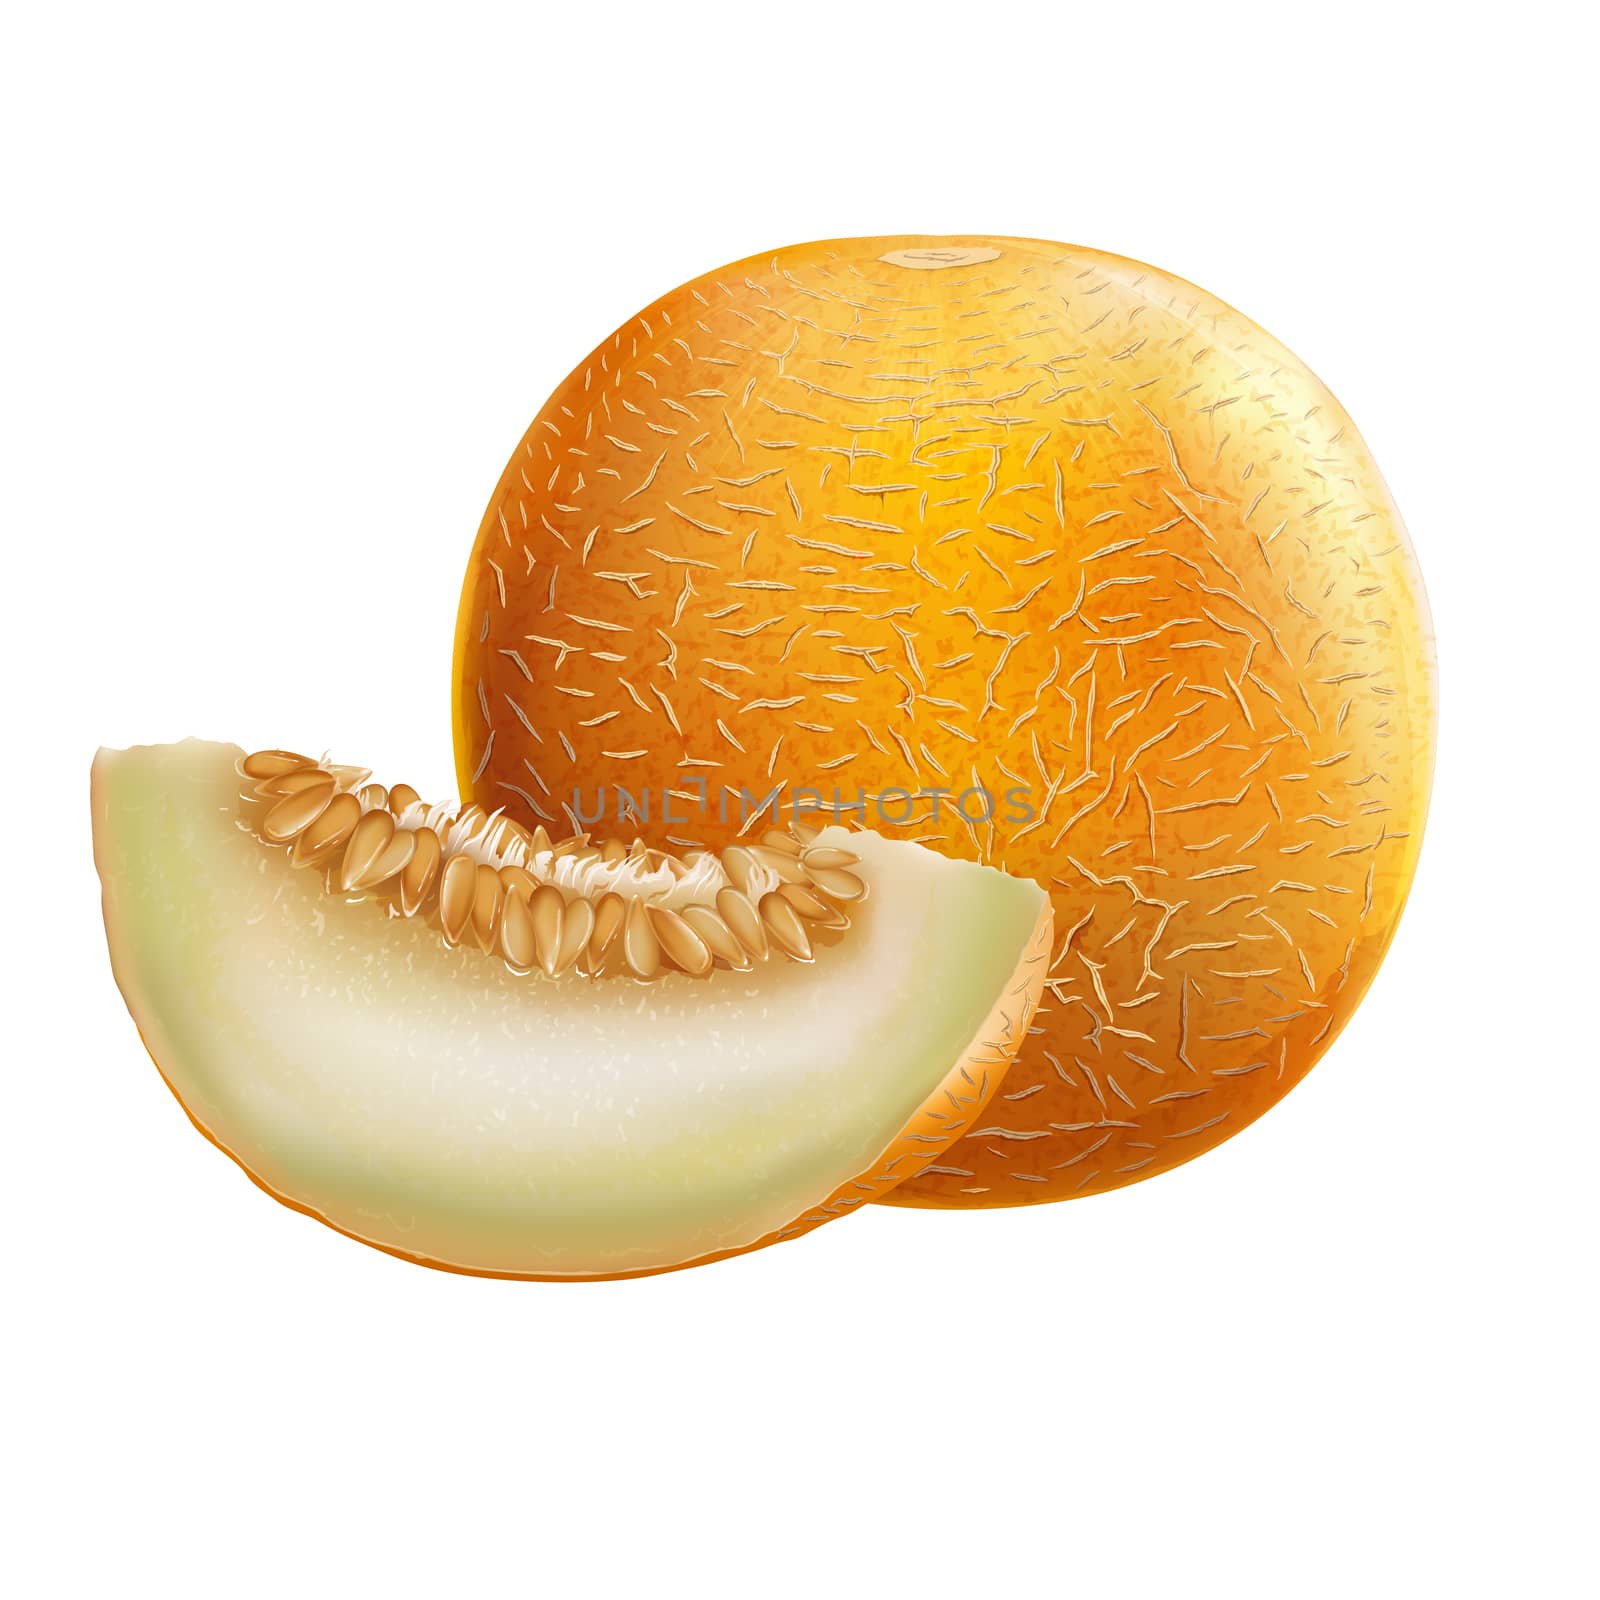 Melon on white background by ConceptCafe